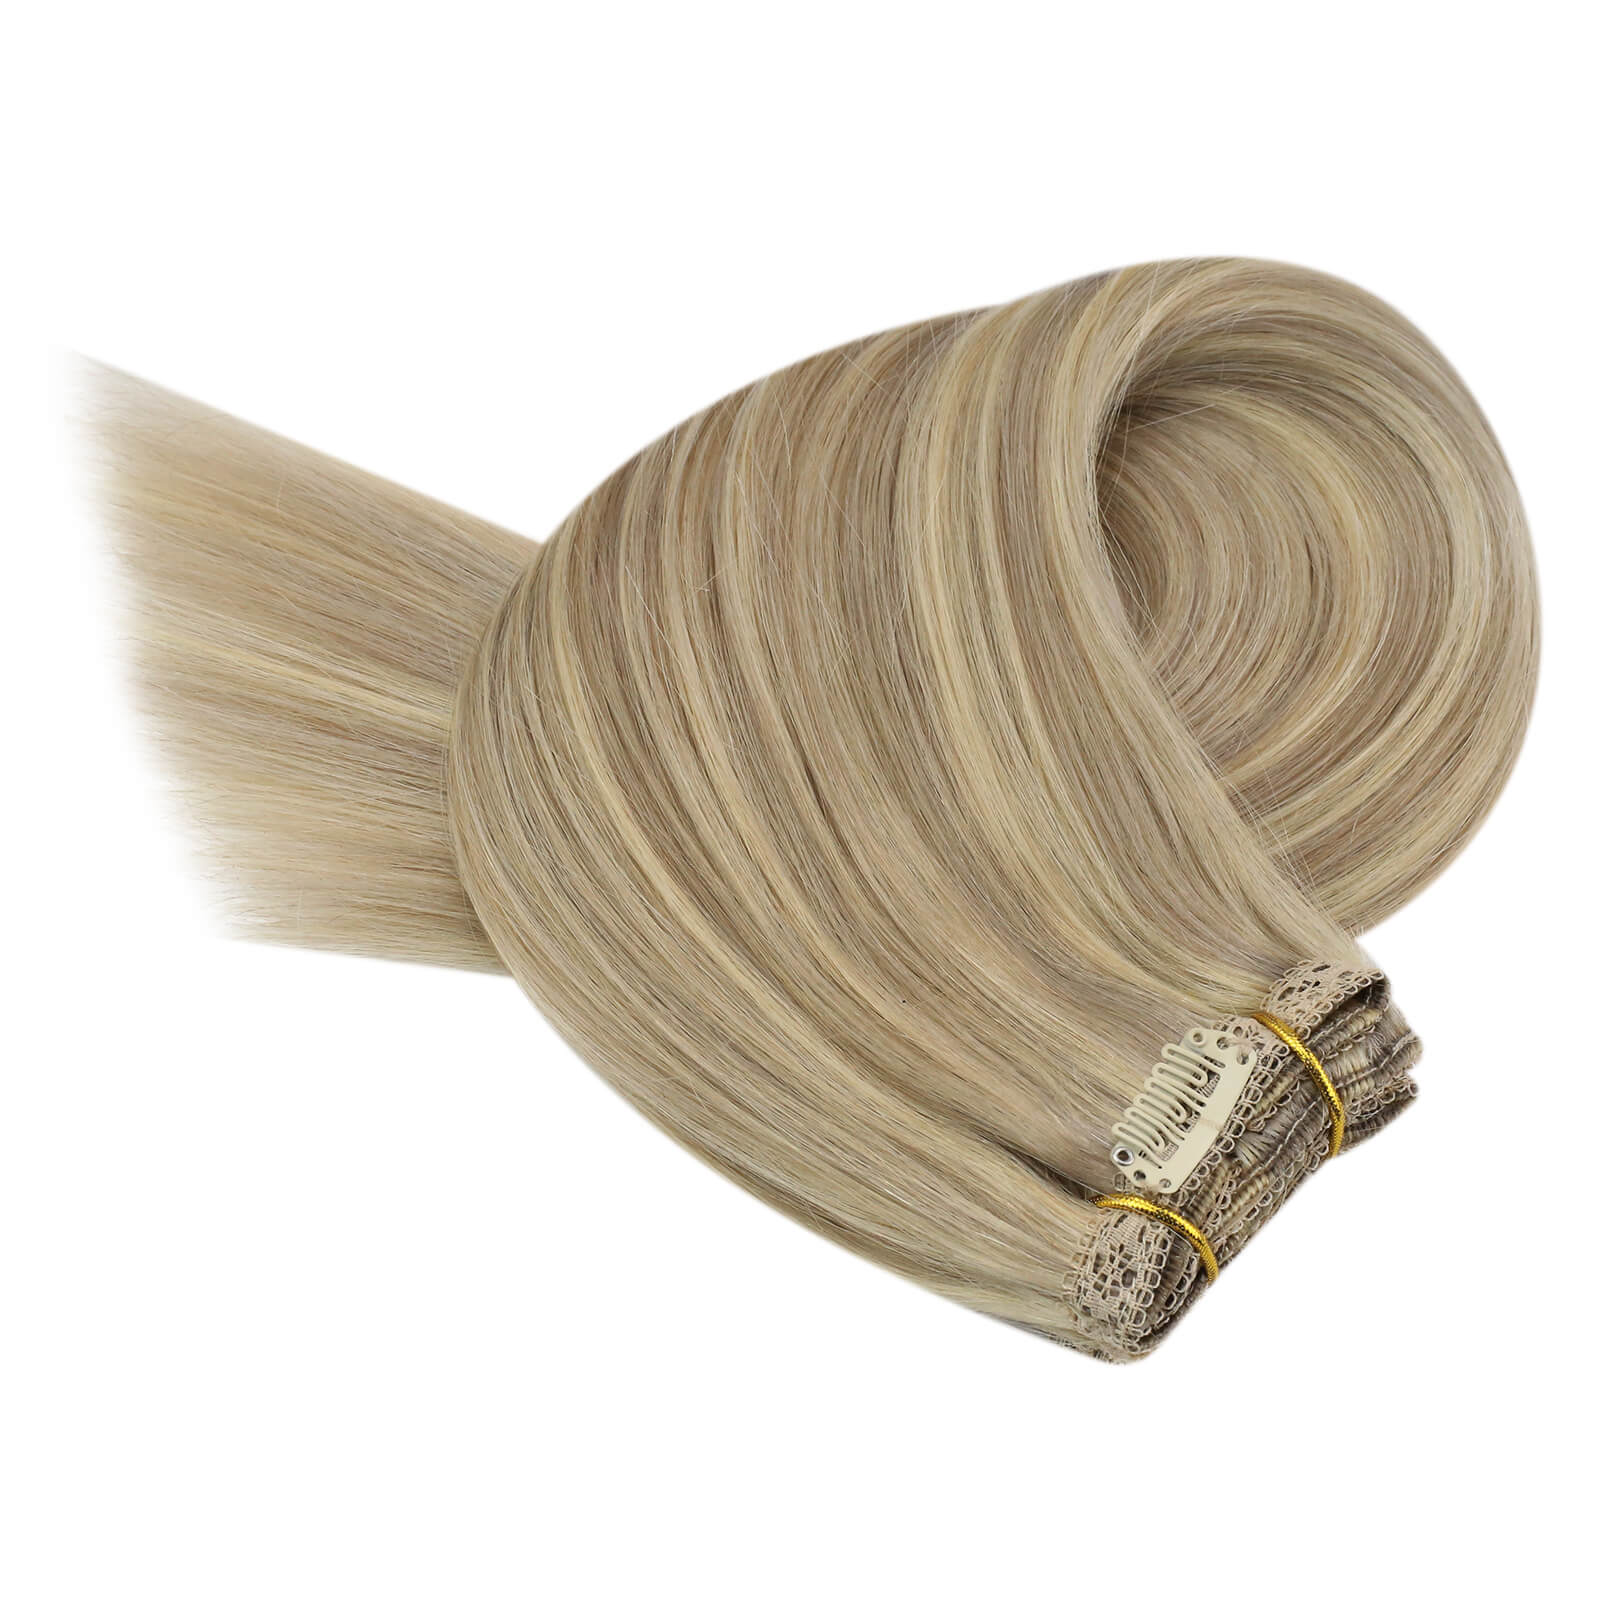 100% human hair extensions clip in